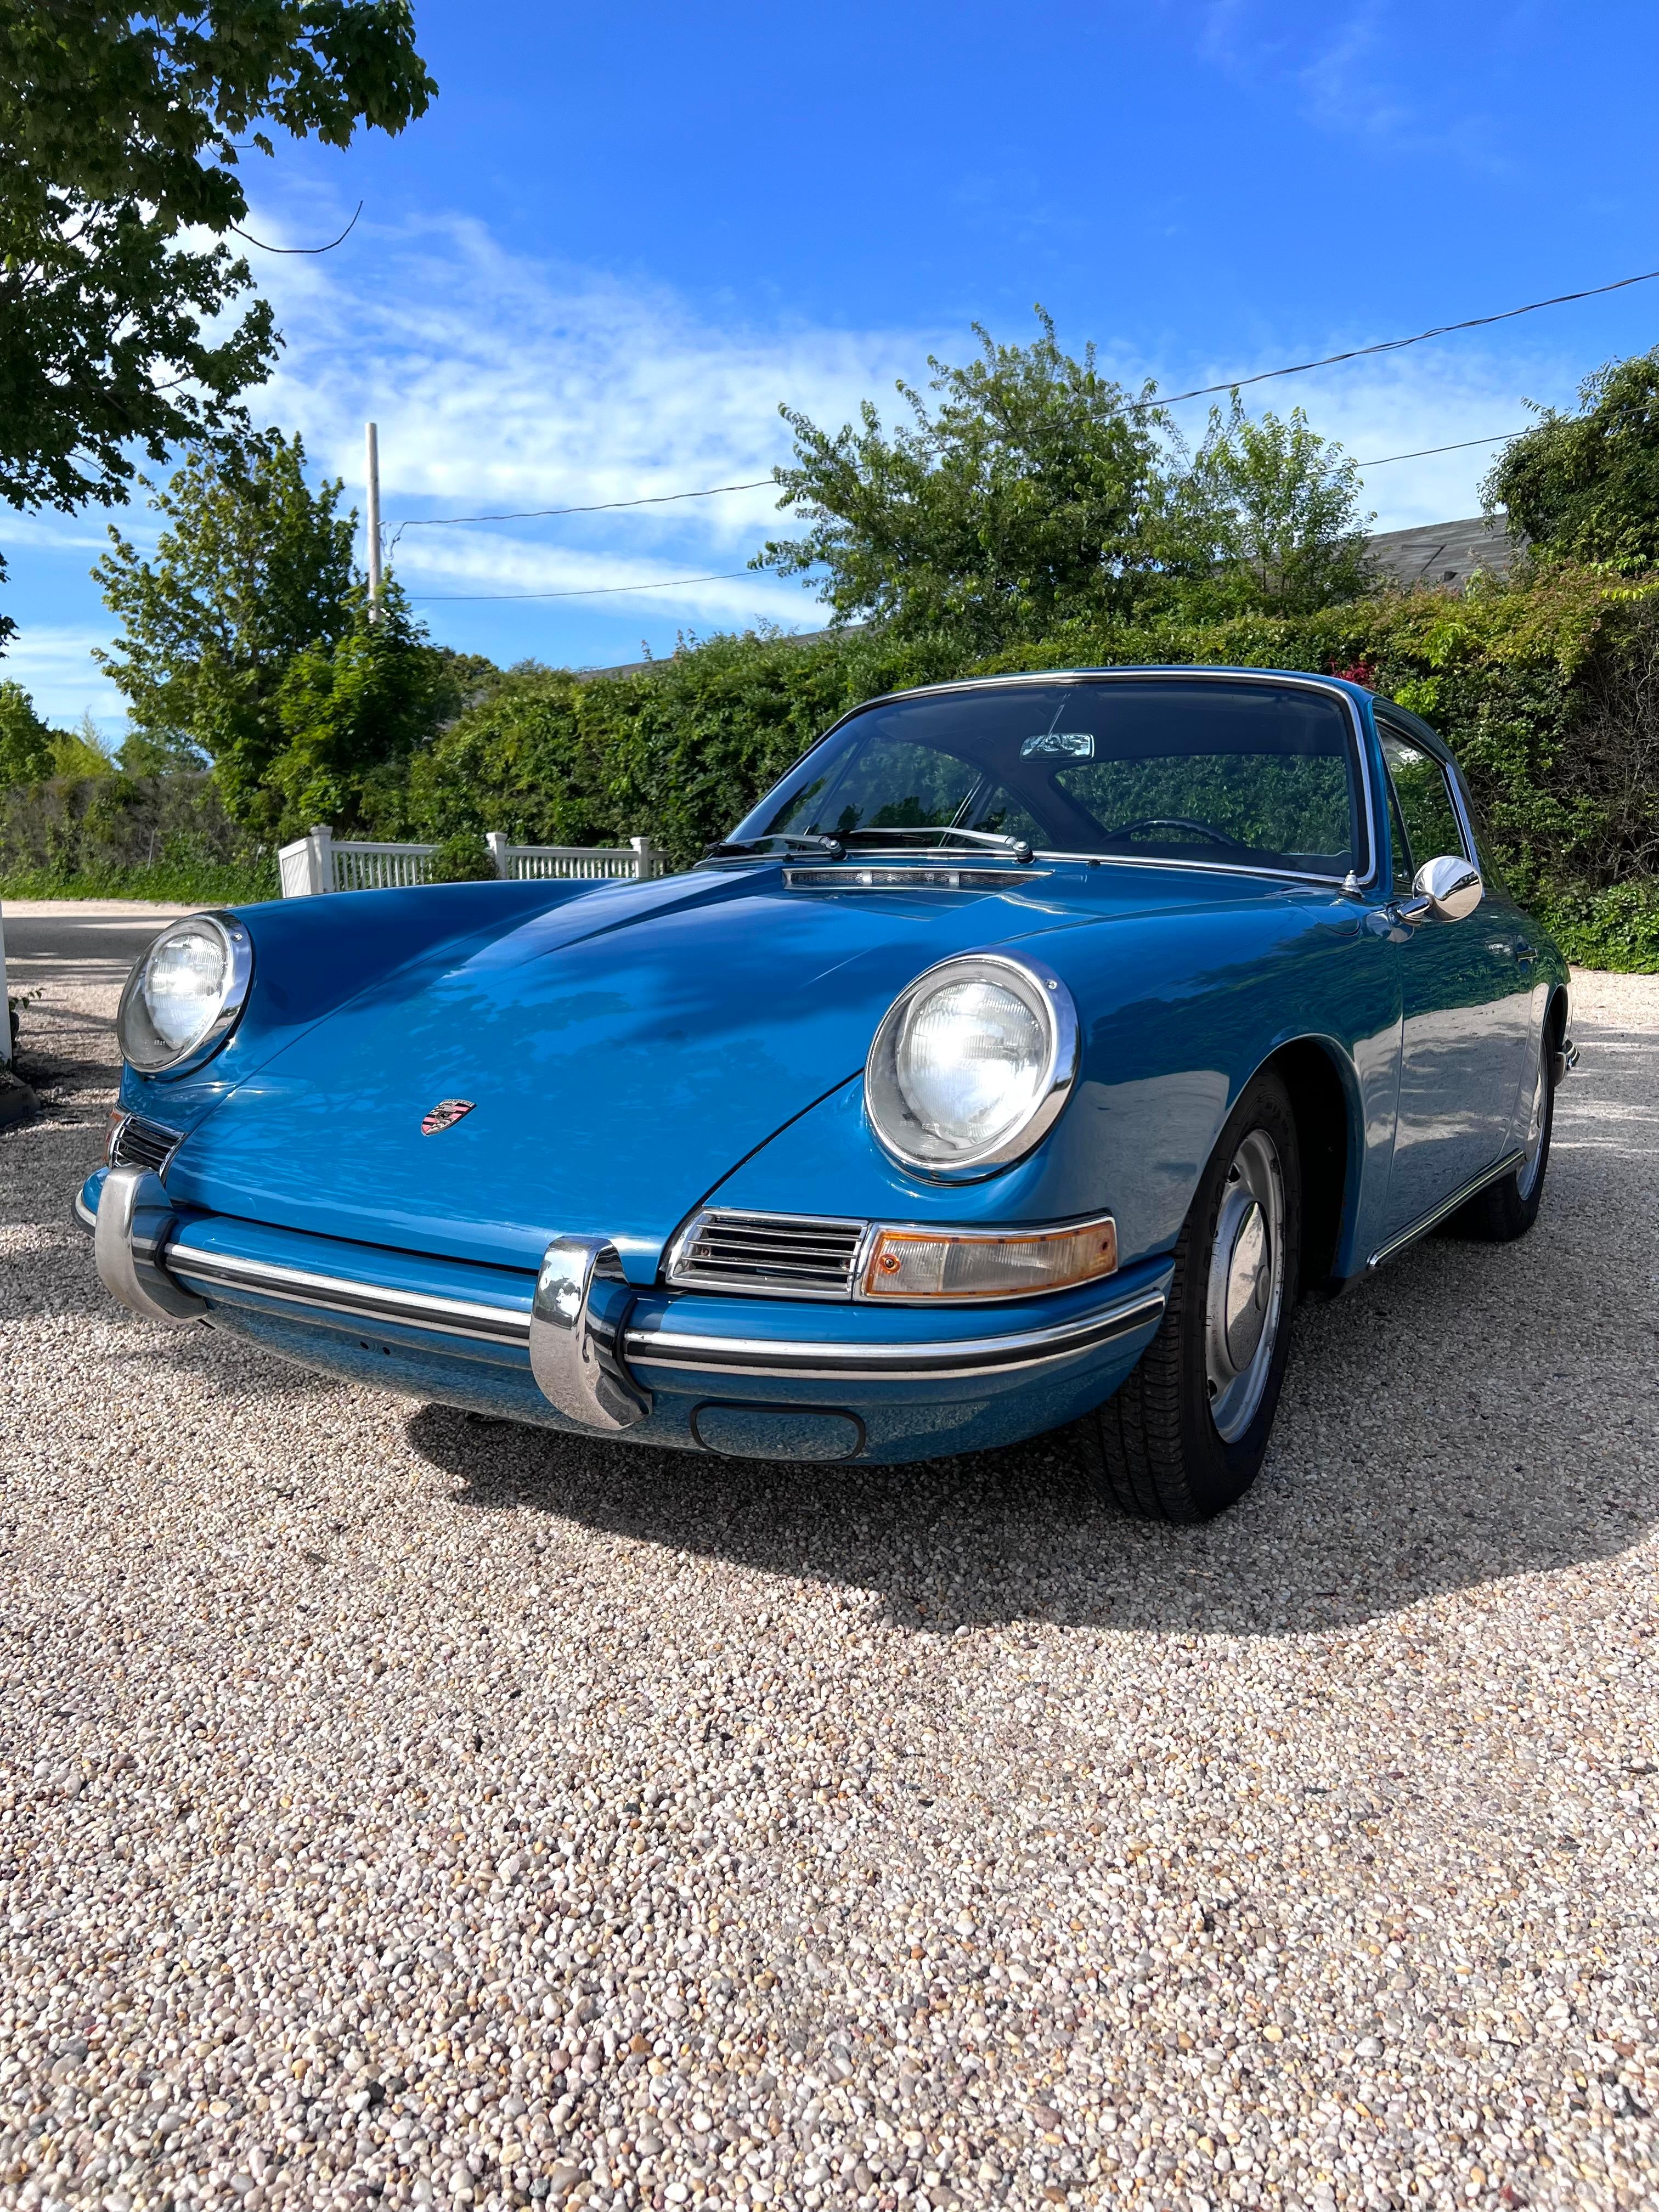 Stunning 1967 Porsche 912 in Aga Blue. Classic short wheel based Porsche that is just over 56 years old. No rust. 5 speed original transmission. KARDEX shows original chassis, engine number, purchase date, and paint code. Lockable glovebox with